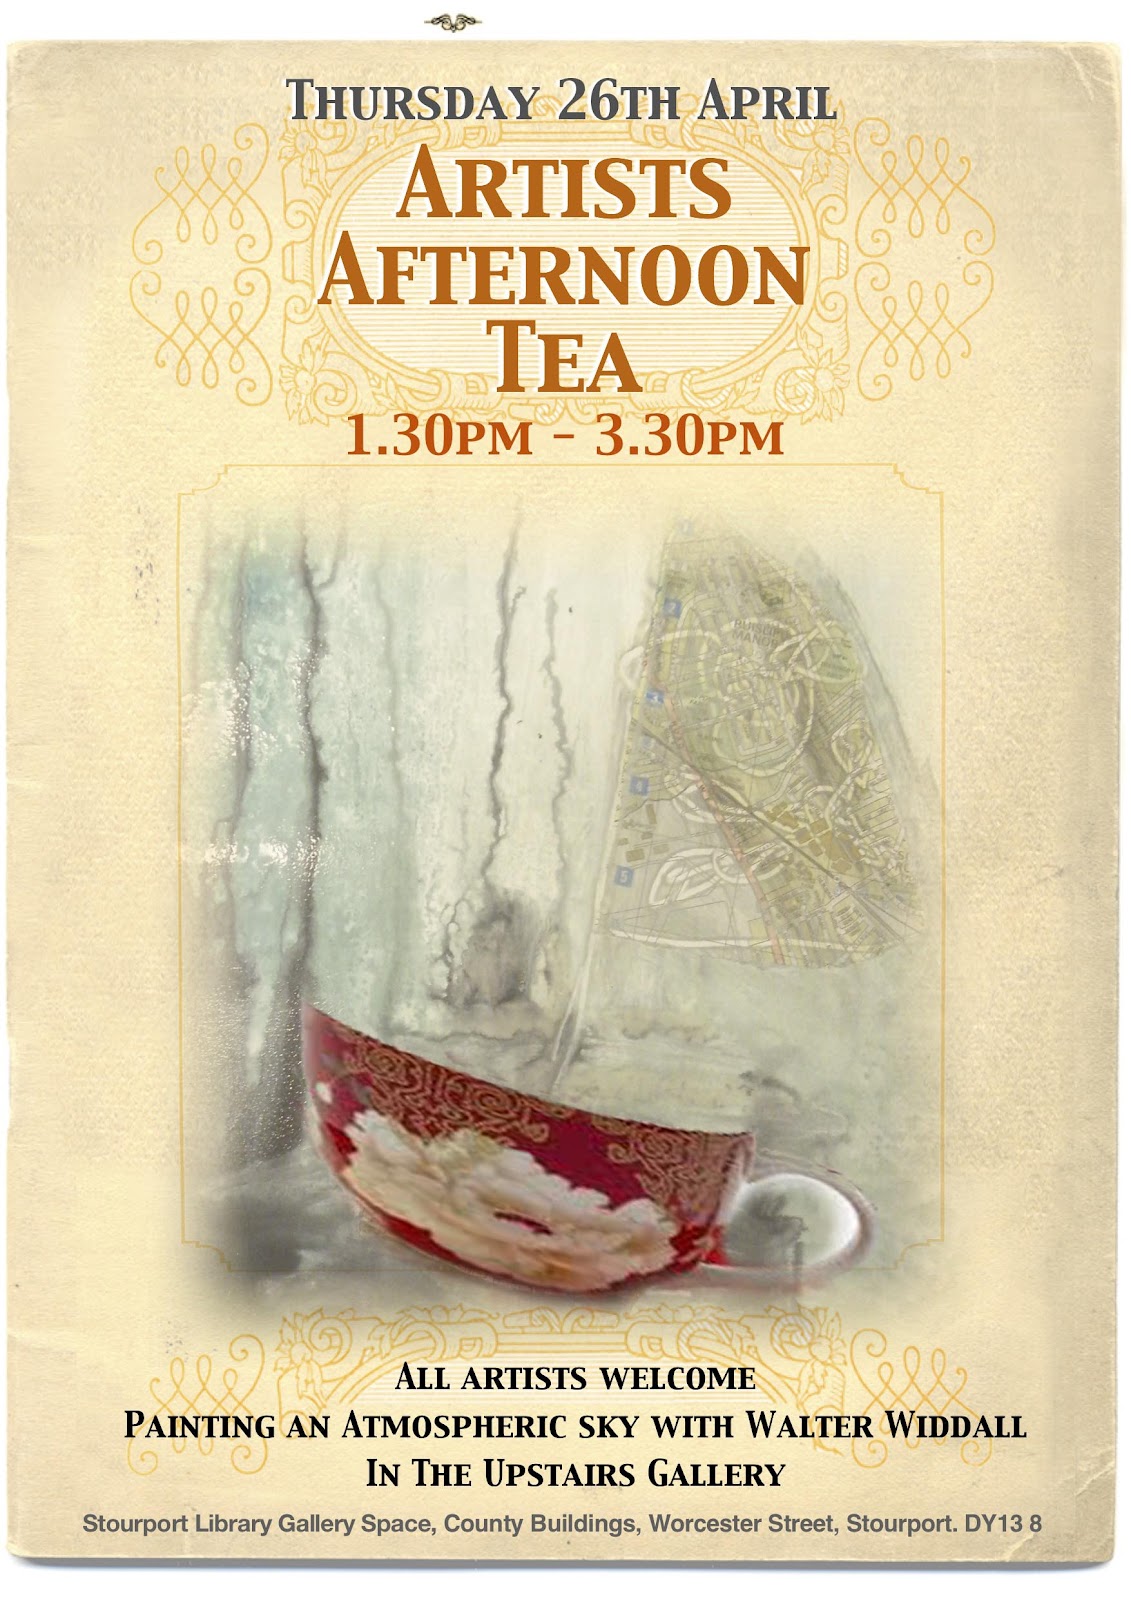 Afternoon Tea Poster